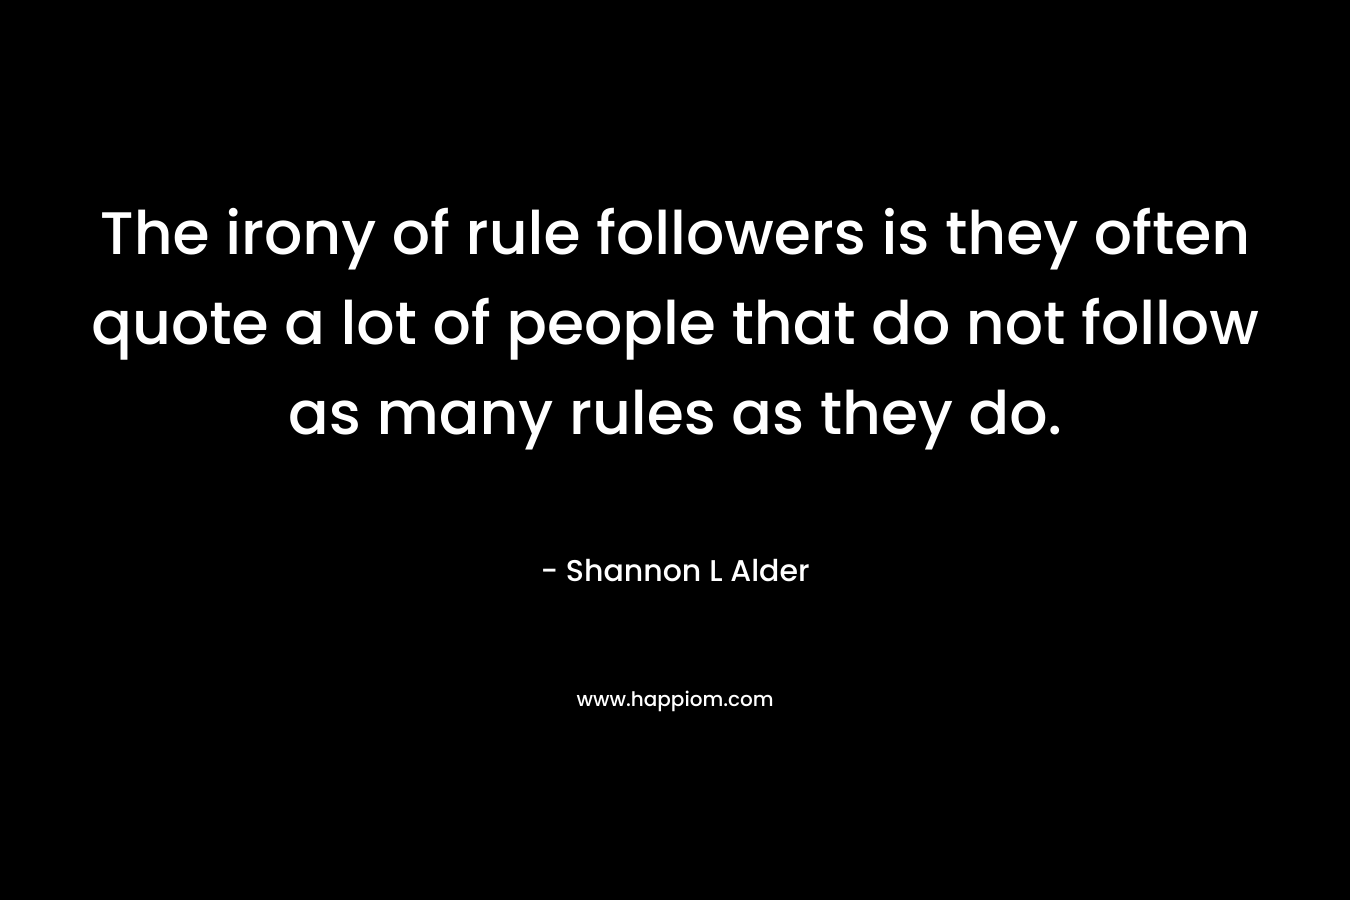 The irony of rule followers is they often quote a lot of people that do not follow as many rules as they do.